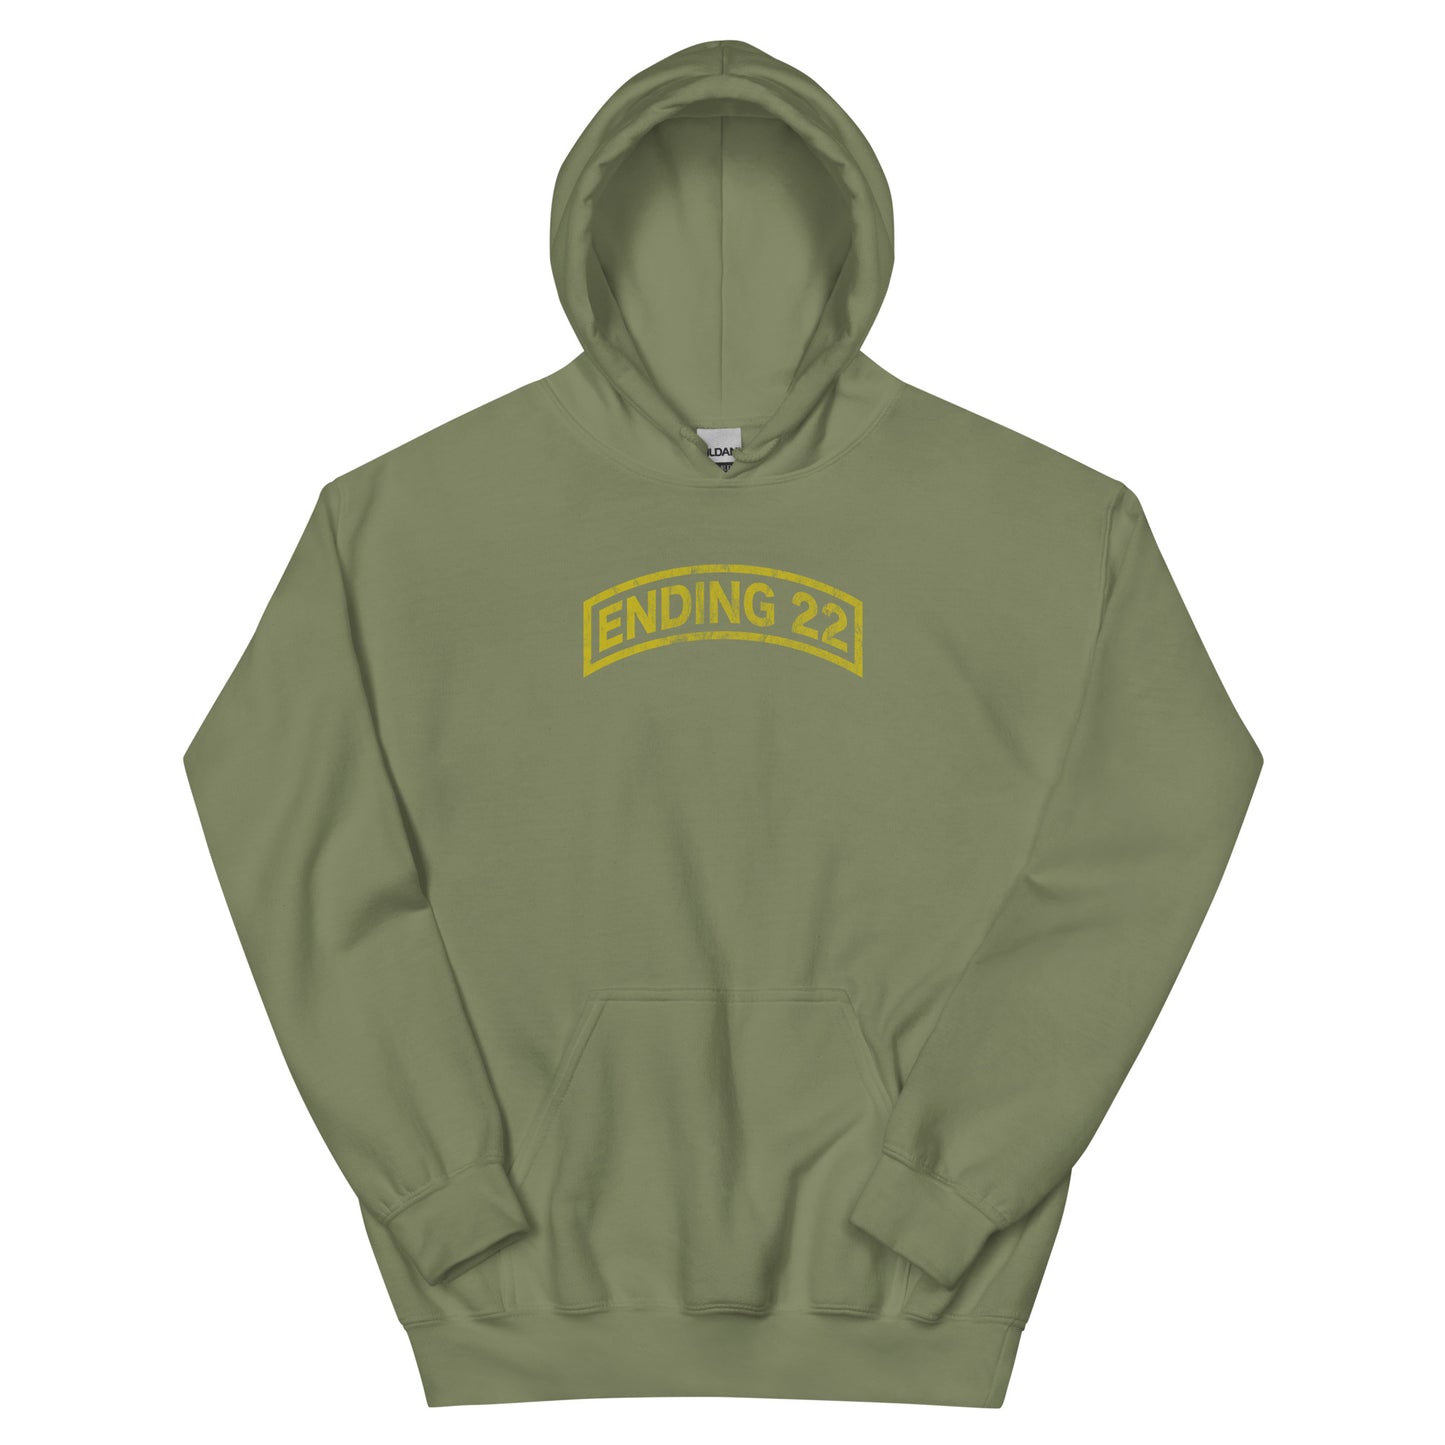 ENDING 22 US Army Ranger Tab Edition Hoodie Military Green Front